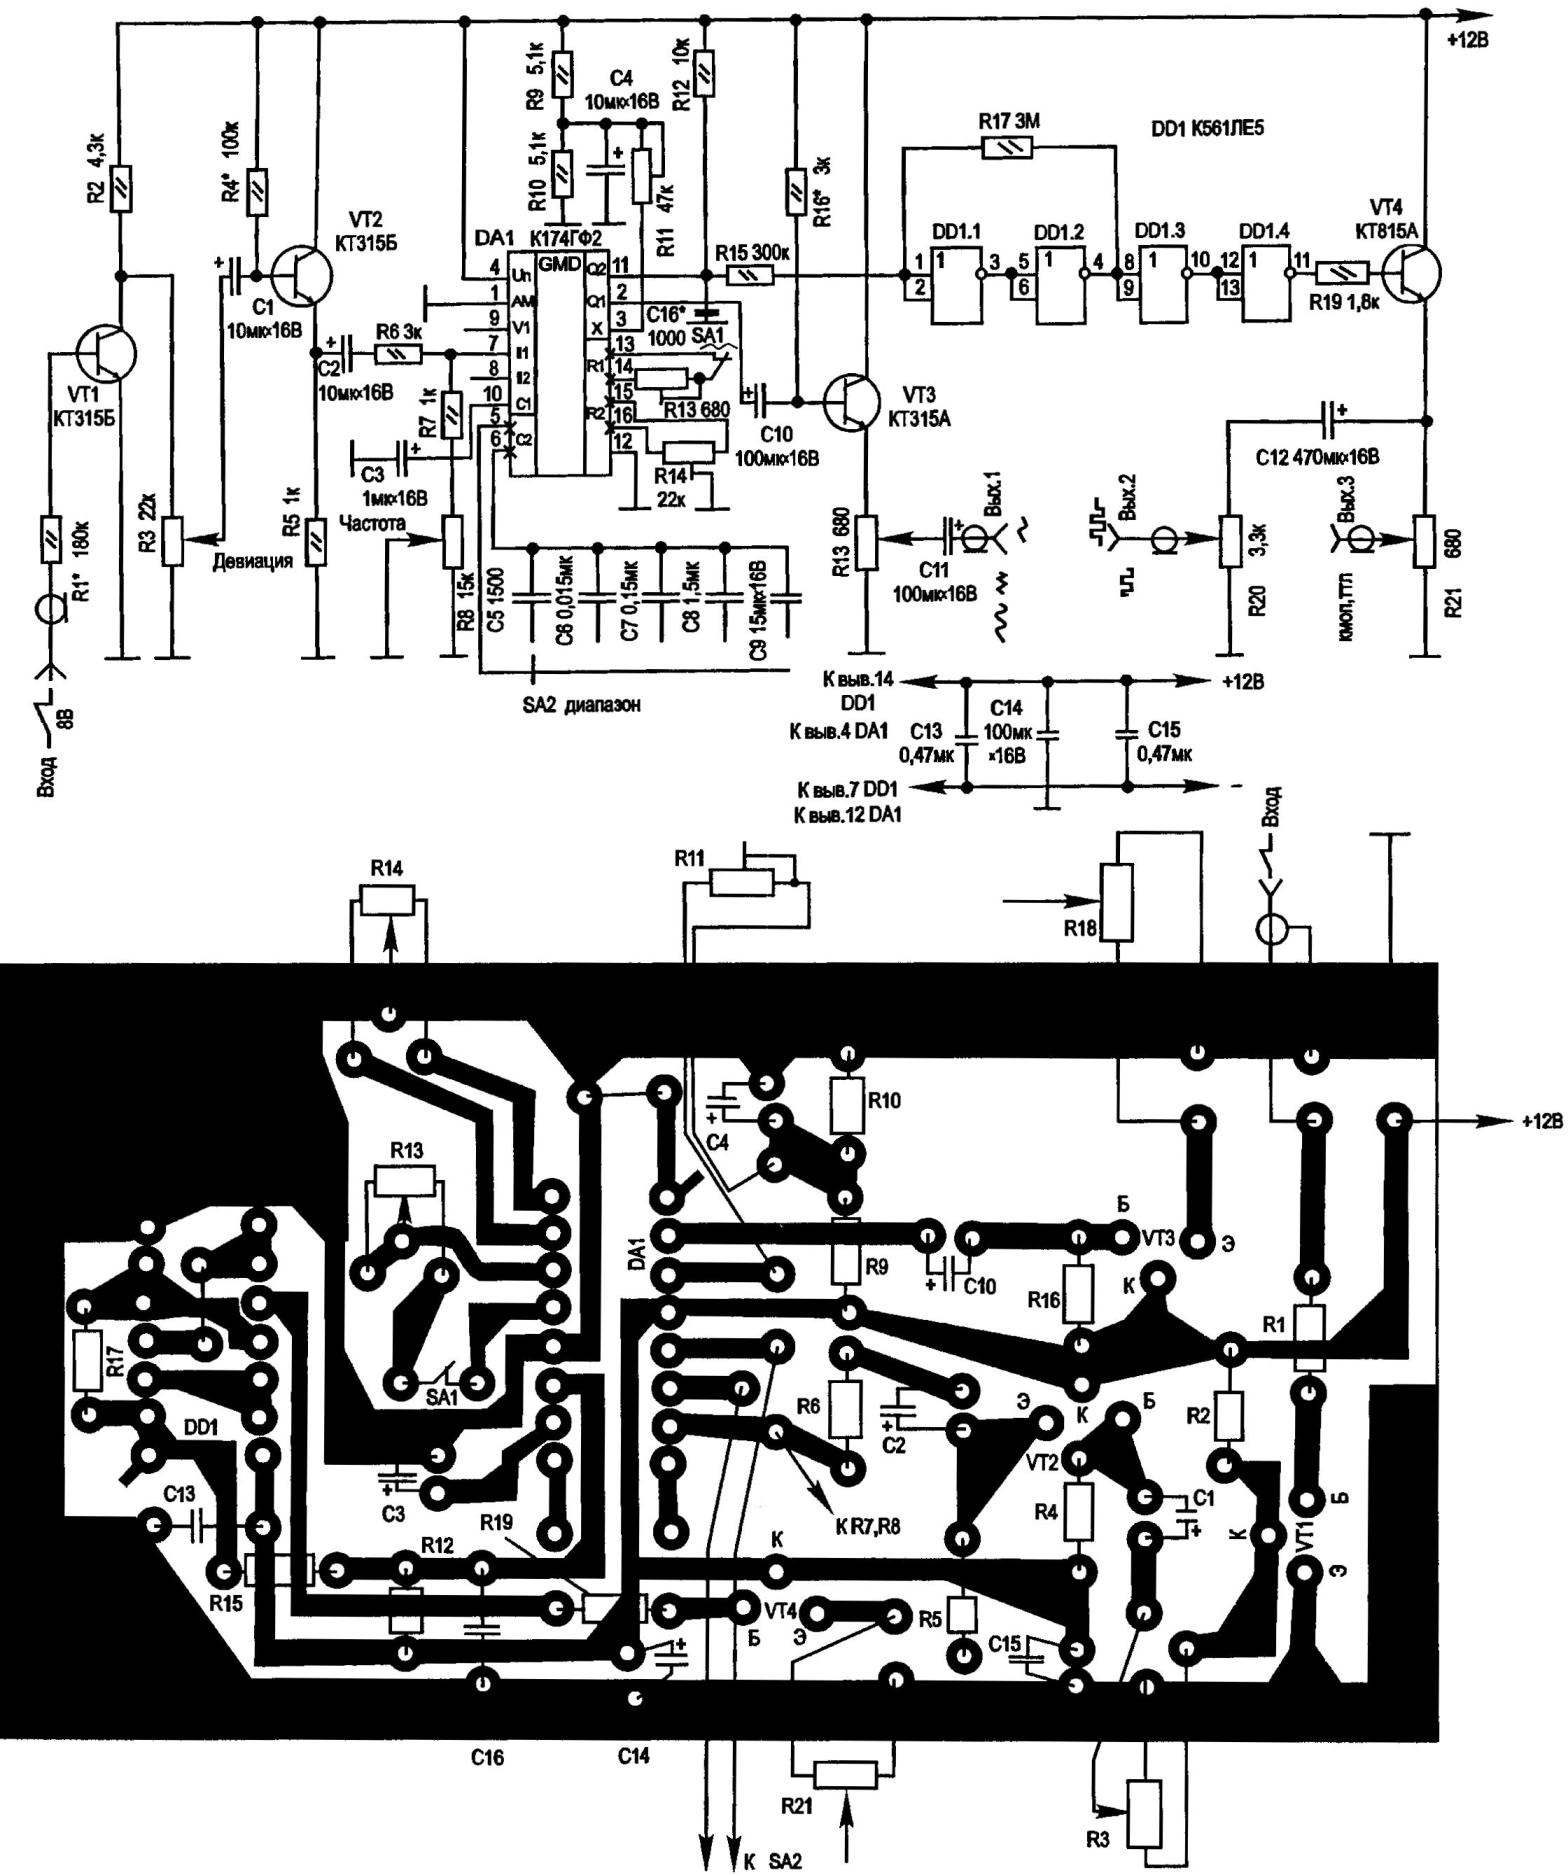 Electrical schematic and a printed circuit Board, a homemade function generator frequency sweep